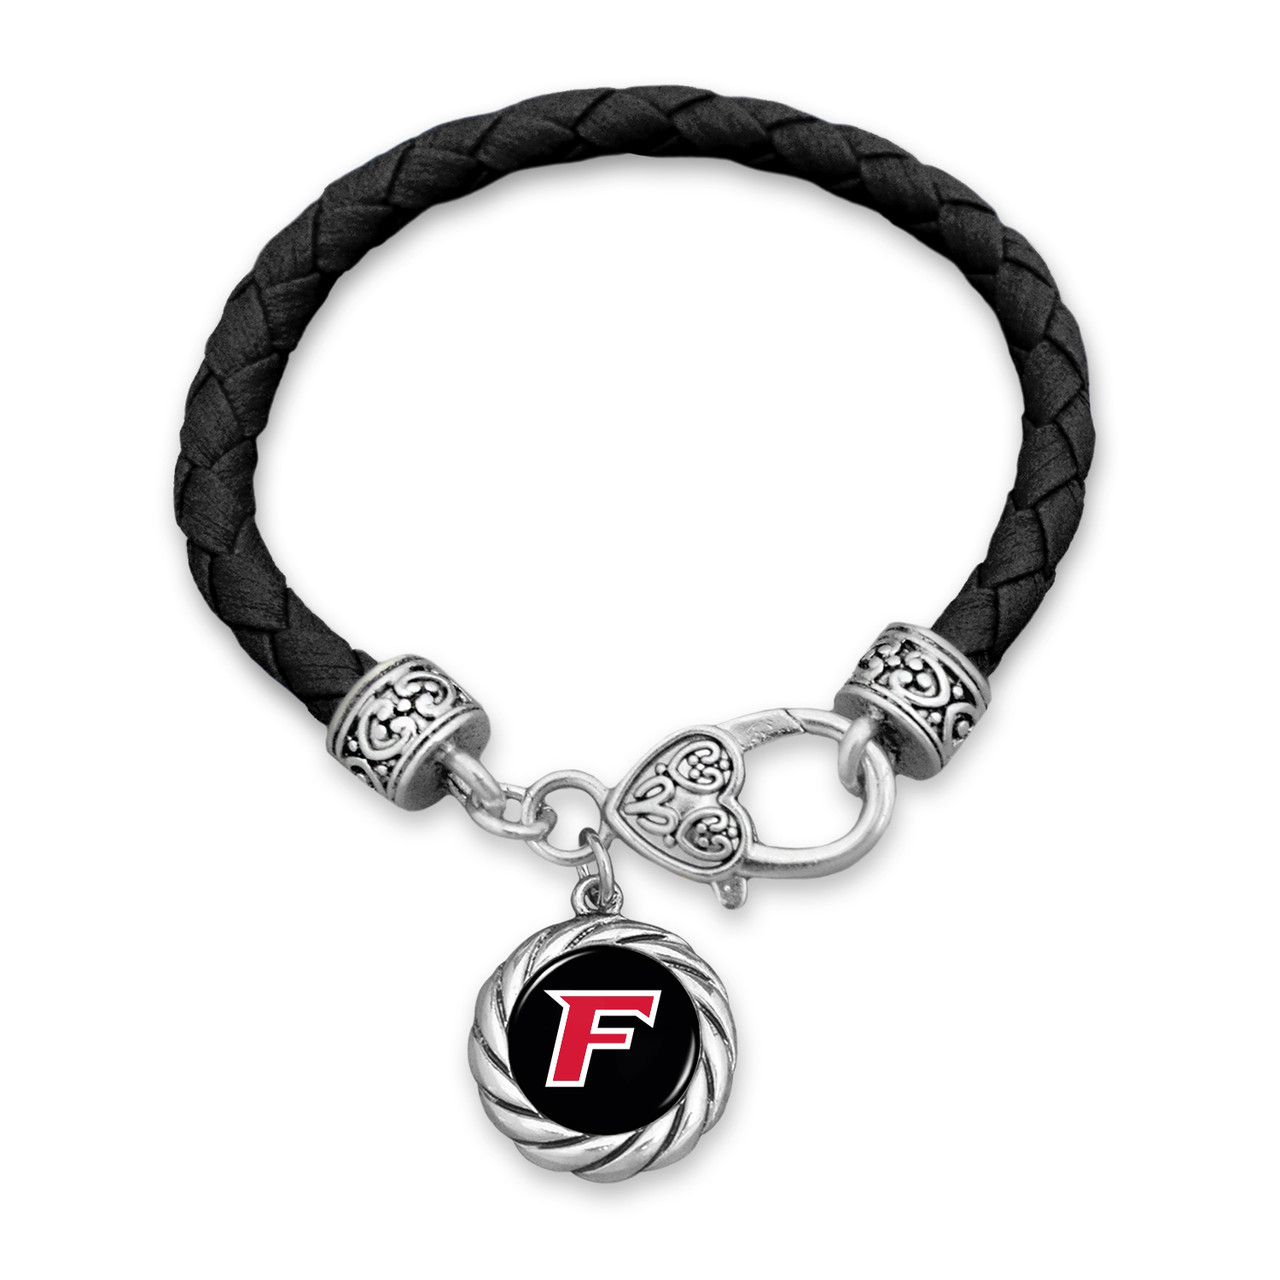 Fairfield Stags Bracelet- Harvey Leather Twisted Rope